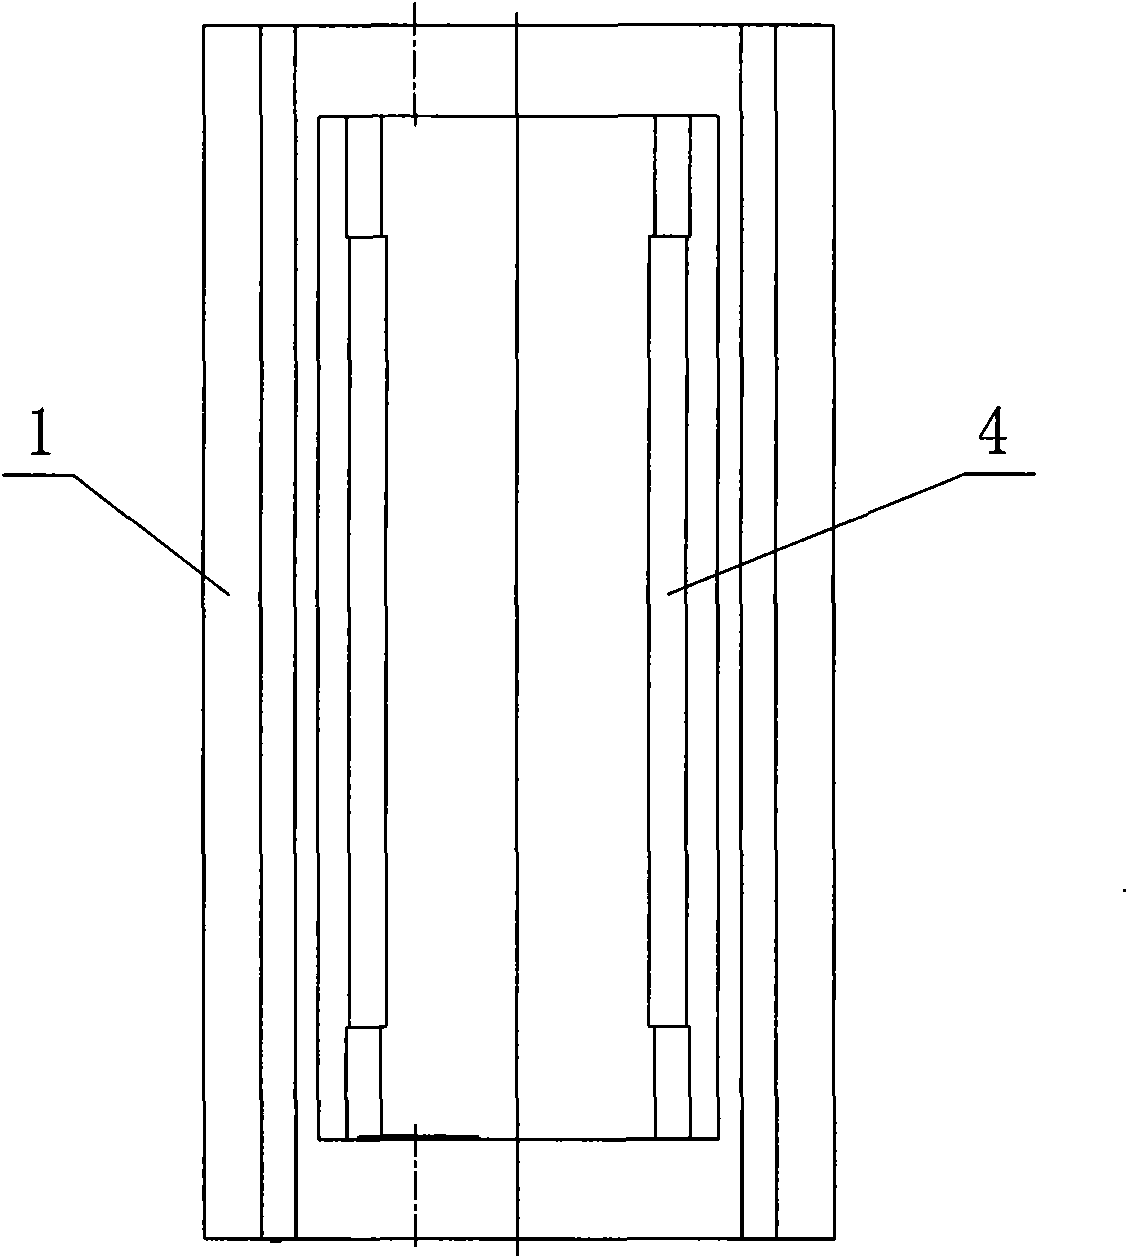 Upright post structure of horizontal type numerical control boring-milling machine